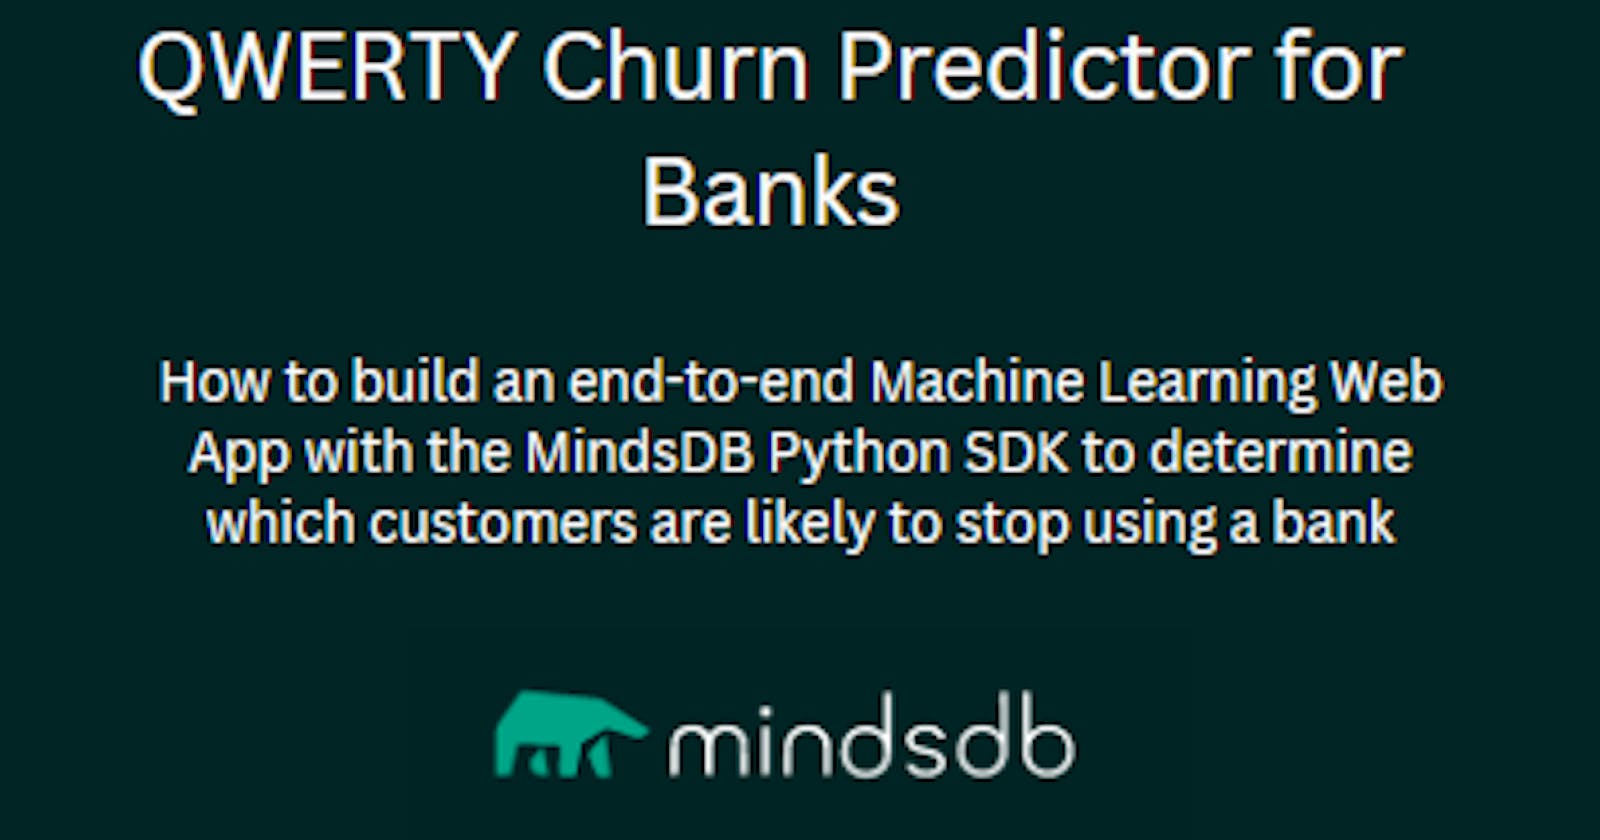 QWERTY: How to  build an end-to-end Machine Learning Web App to determine which customers are likely to stop using a bank with the MindsDB Python SDK